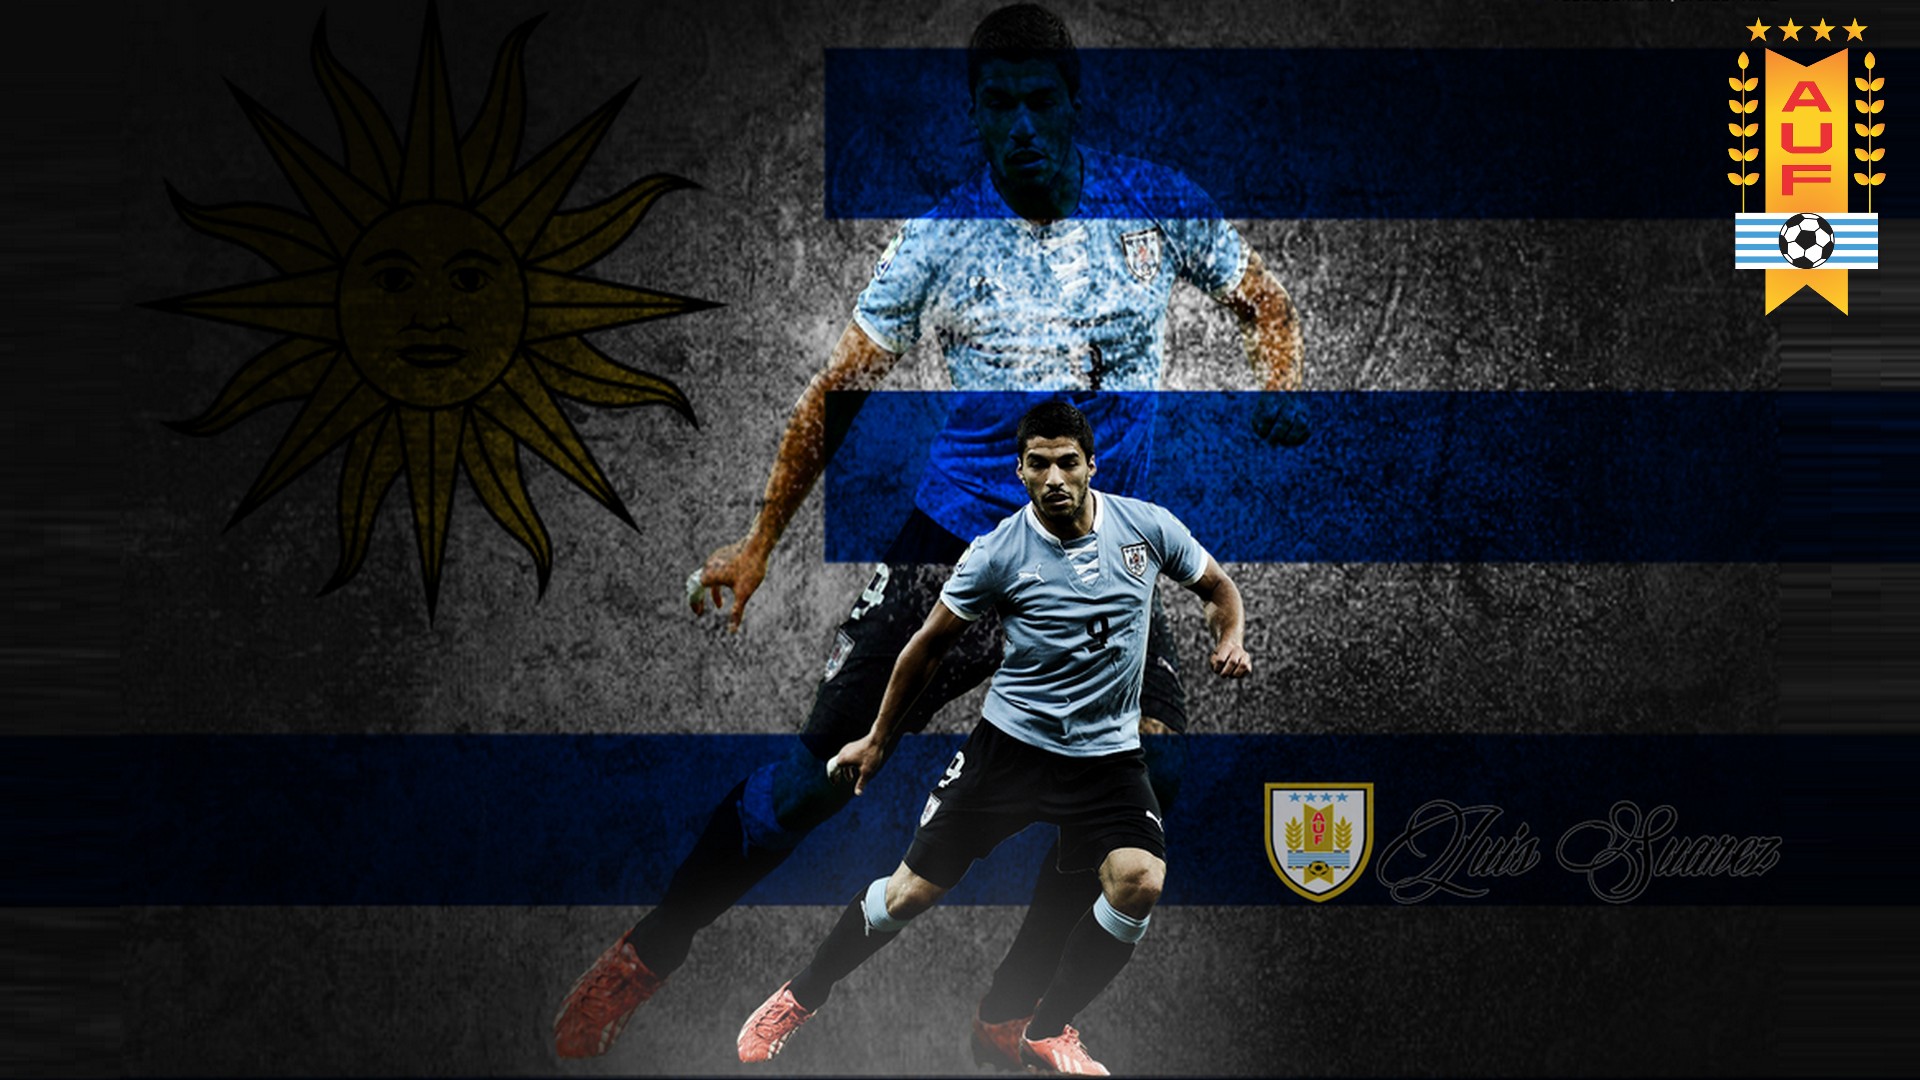 Luis Suarez Uruguay HD Wallpapers With Resolution 1920X1080 pixel. You can make this wallpaper for your Mac or Windows Desktop Background, iPhone, Android or Tablet and another Smartphone device for free